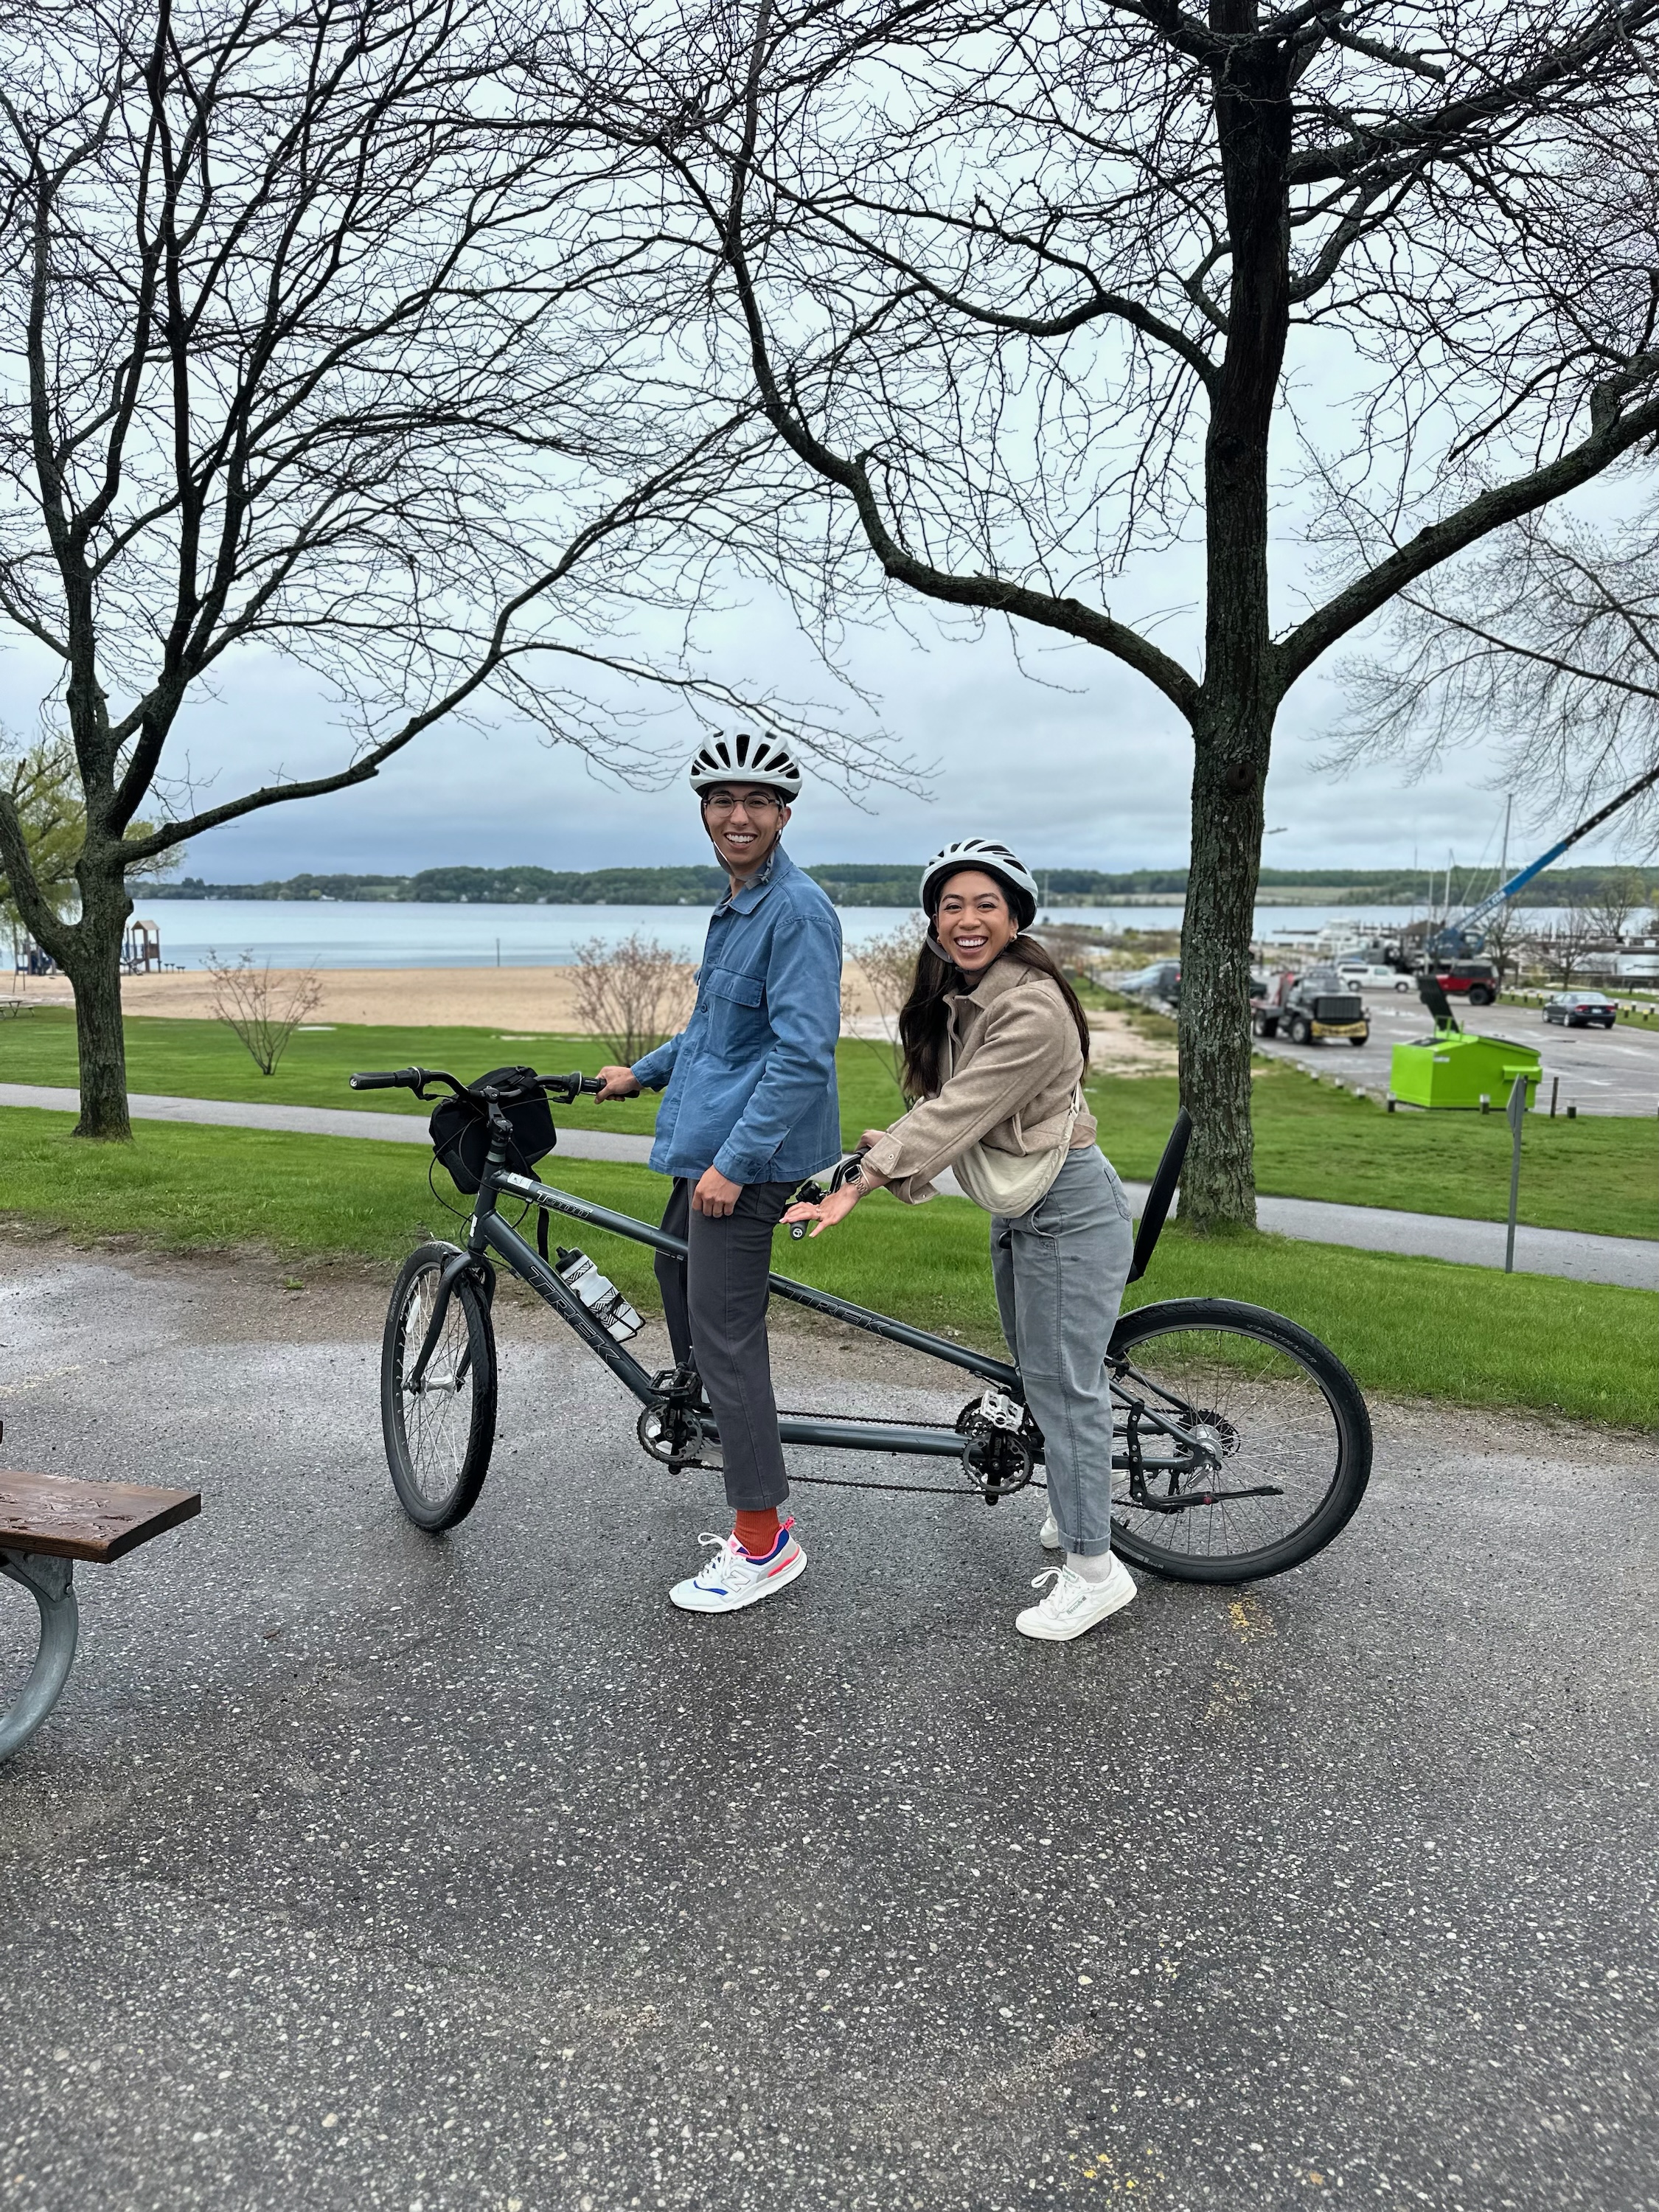 Jack and Wife posing in a park on a two person bike. 